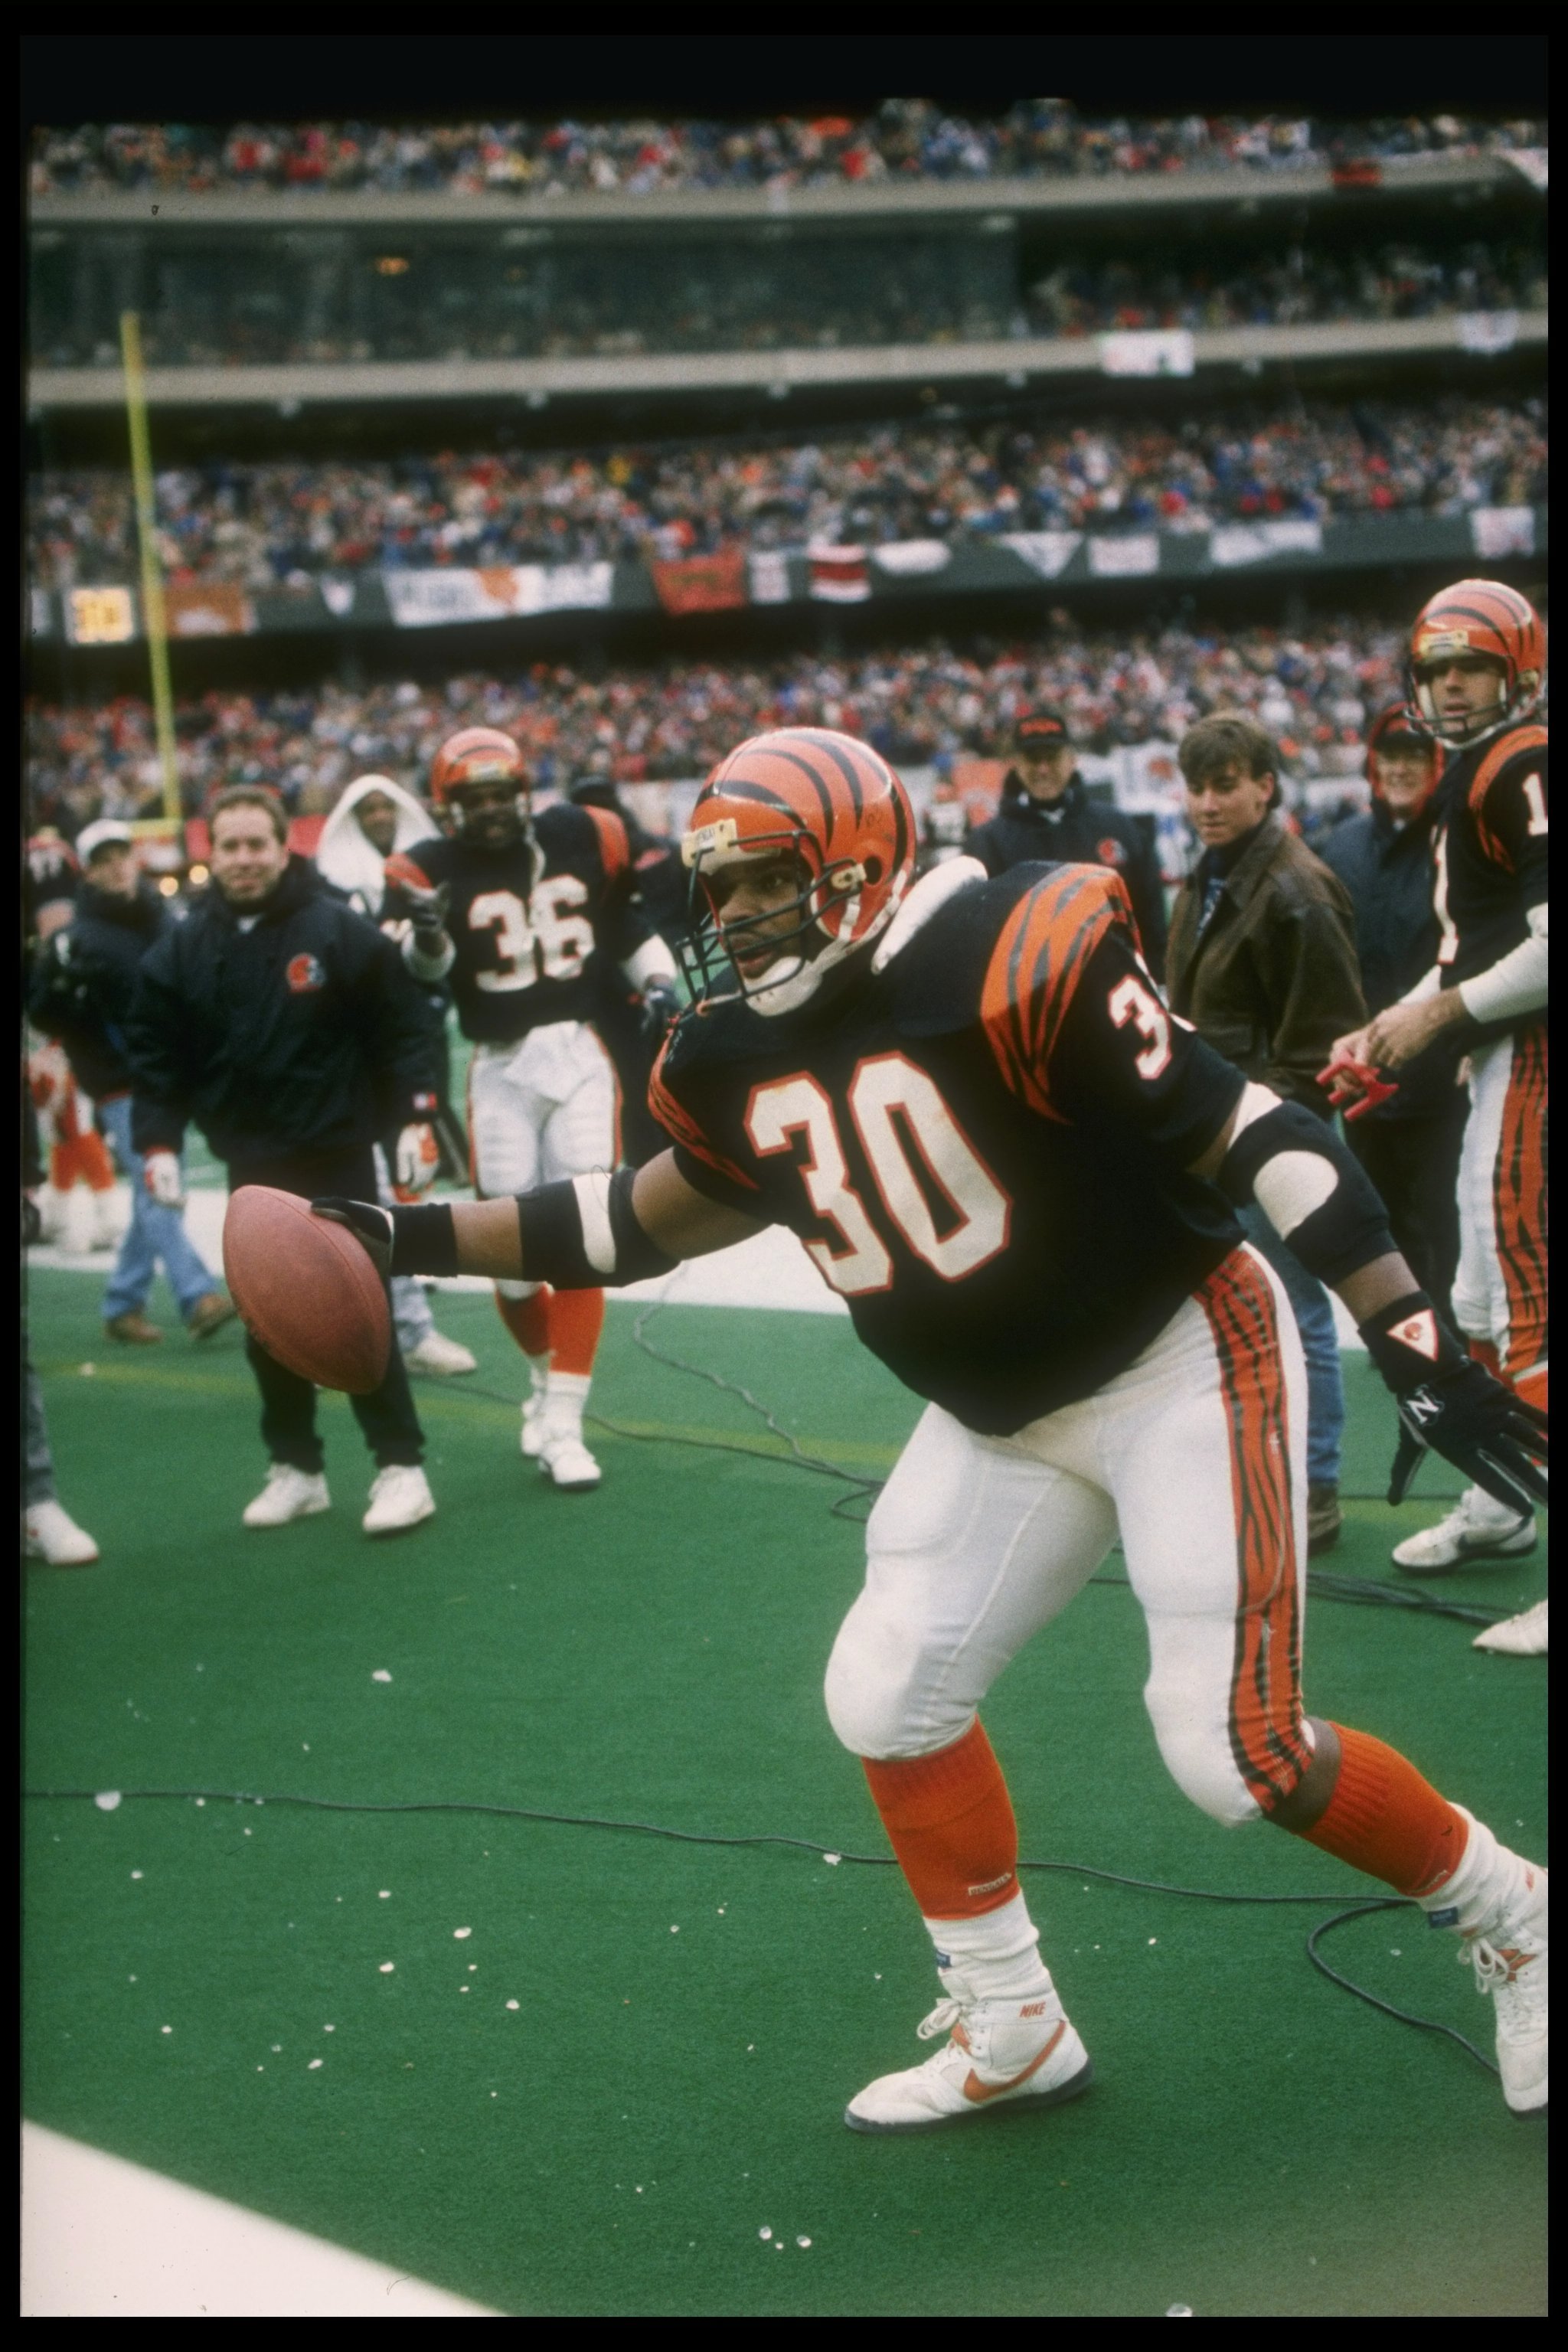 8 Jan 1989: Running back Ickey Woods of the Cincinnati Bengals celebrates during a playoff game against the Buffalo Bills at Riverfront Stadium in Cincinnati, Ohio. The Bengals won the game, 21-10.